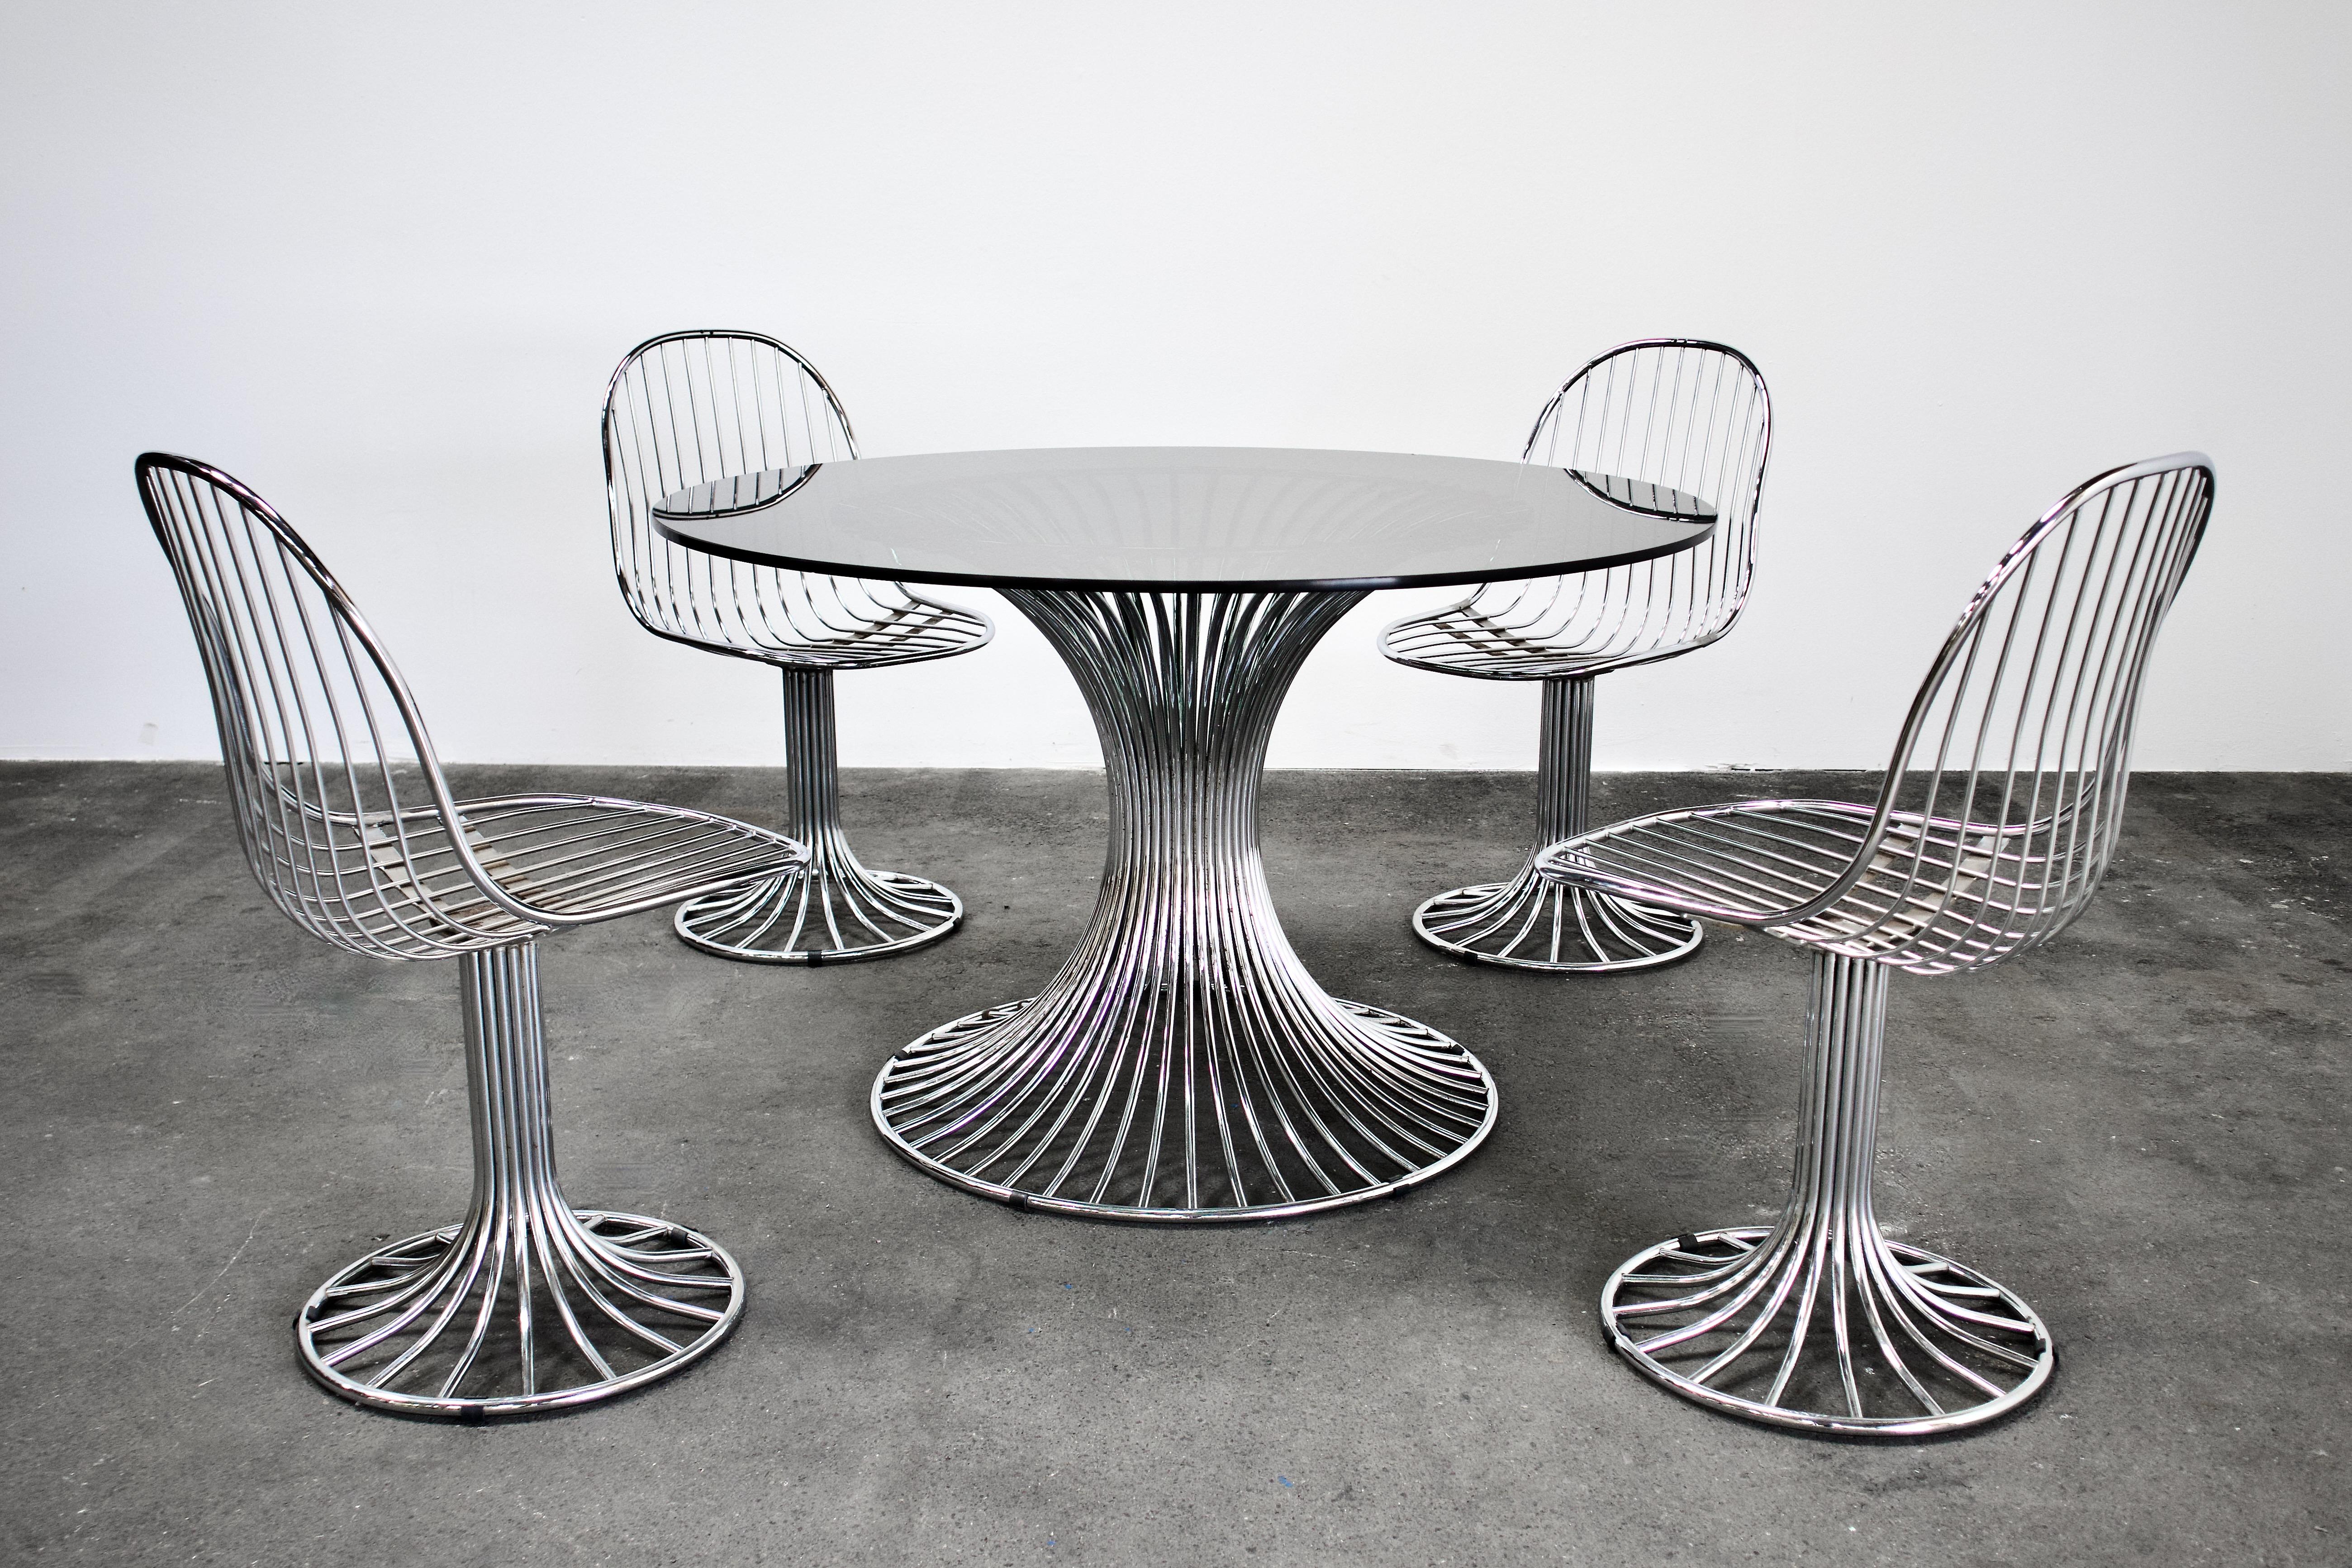 Stunning Mid Century Modern Italian set of 4 chairs and round dining table in chromed tube steel. Likely by Gastone Rinaldi for RIMA. Suitable for indoor and outdoor use. Space age vibes of the Eero Saarinen and Florence Knoll era. Indeed, the